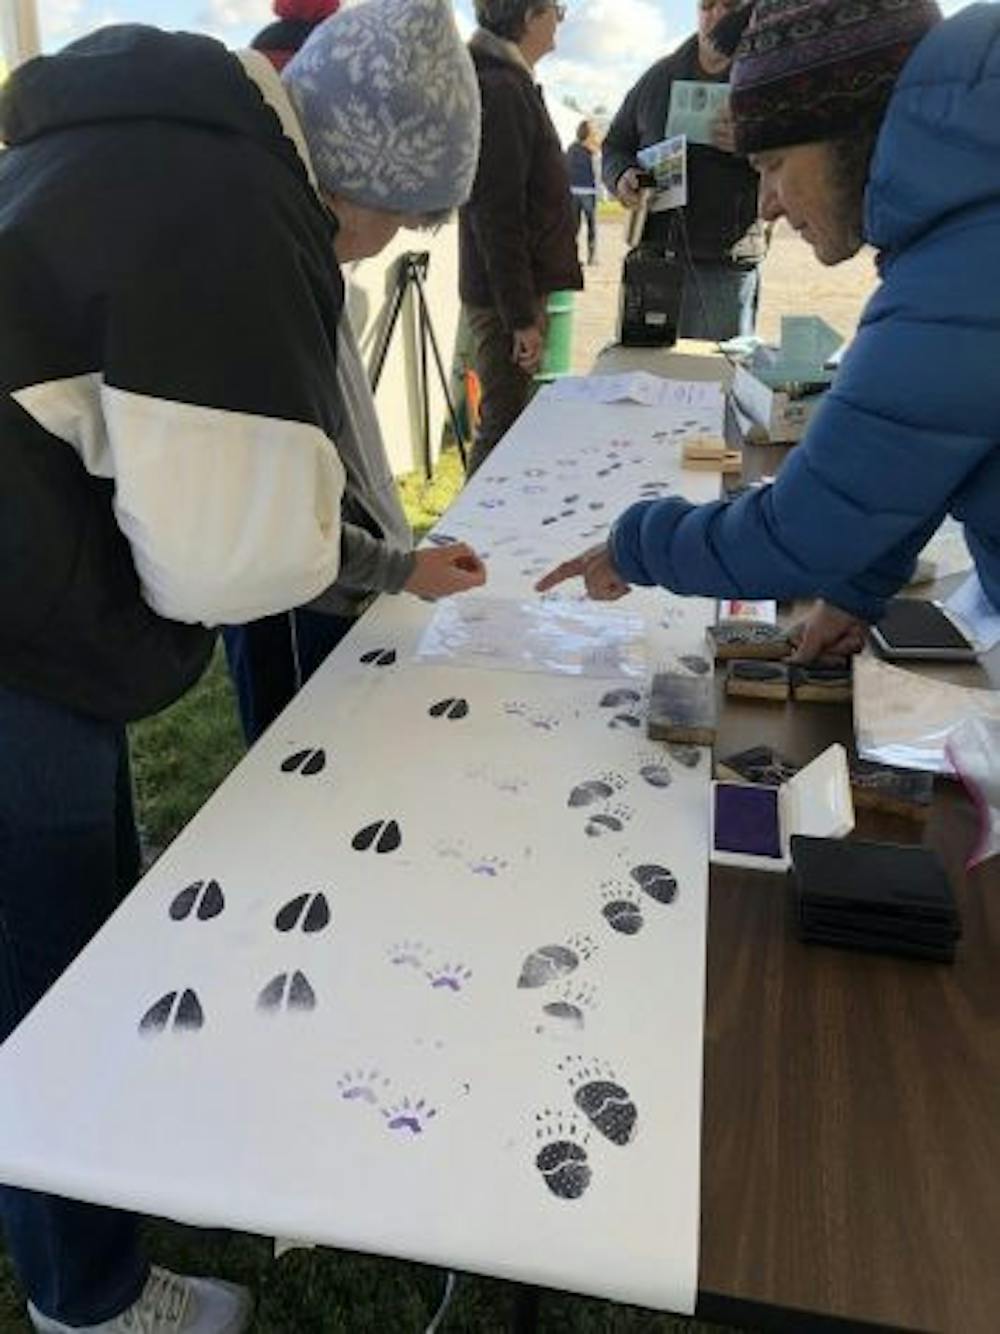 <span class="photocreditinline">MICHAEL FRANK</span><br />From face painting to scientific workshops, Saturday’s Dead Creek Wildlife Day catered to audiences of all ages.